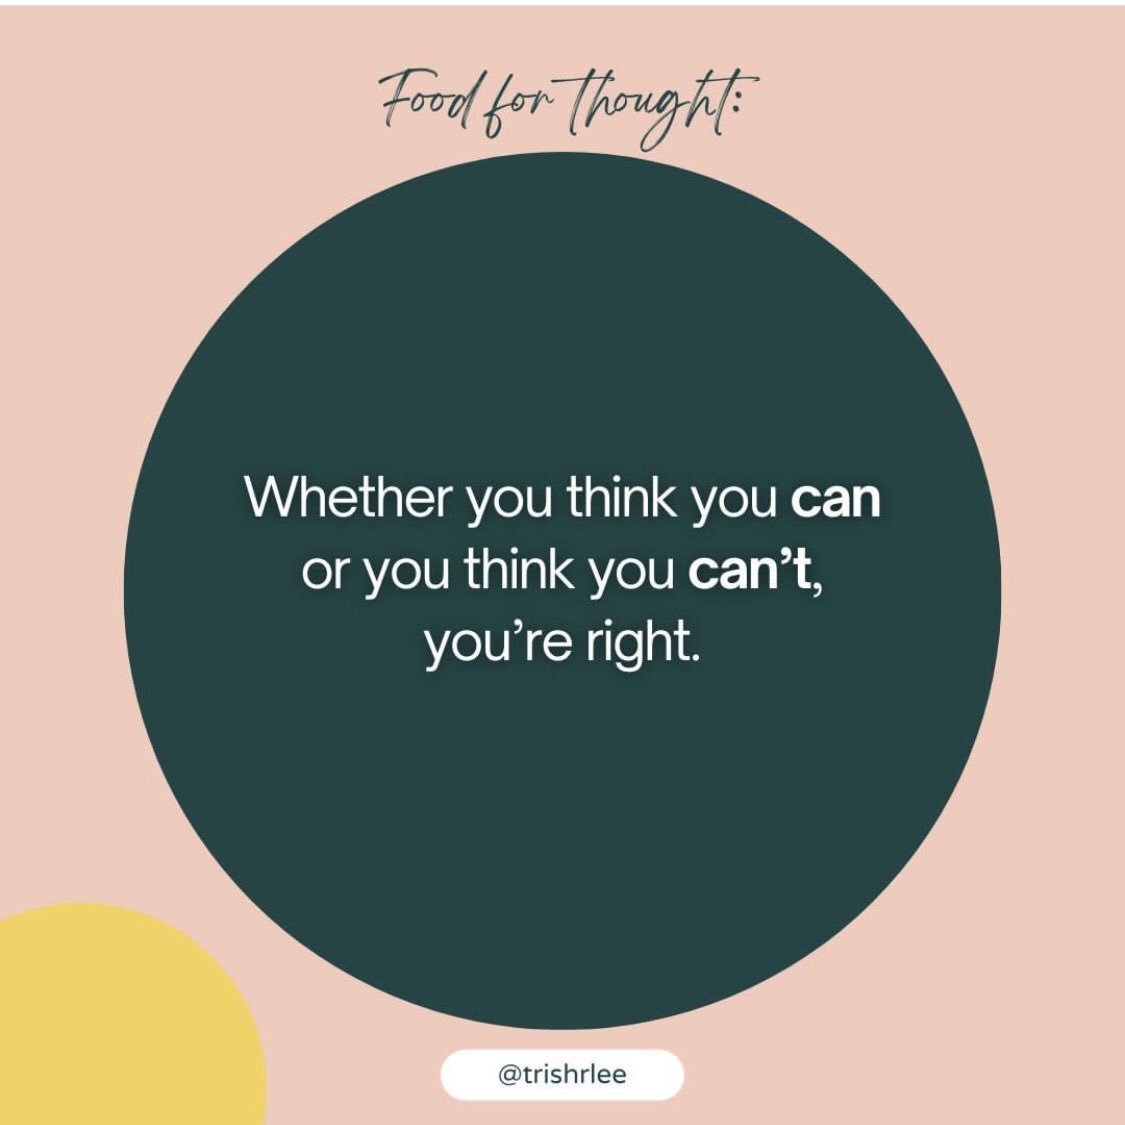 #PERSPECTIVE is everything. Do you agree? 

Click here to read more: instagram.com/p/C1Ub5GkKSio/…

#mindset #foodforthoghts #changeyourthoughts #mindsetcoaching #wisdomquotes #deepthoughts